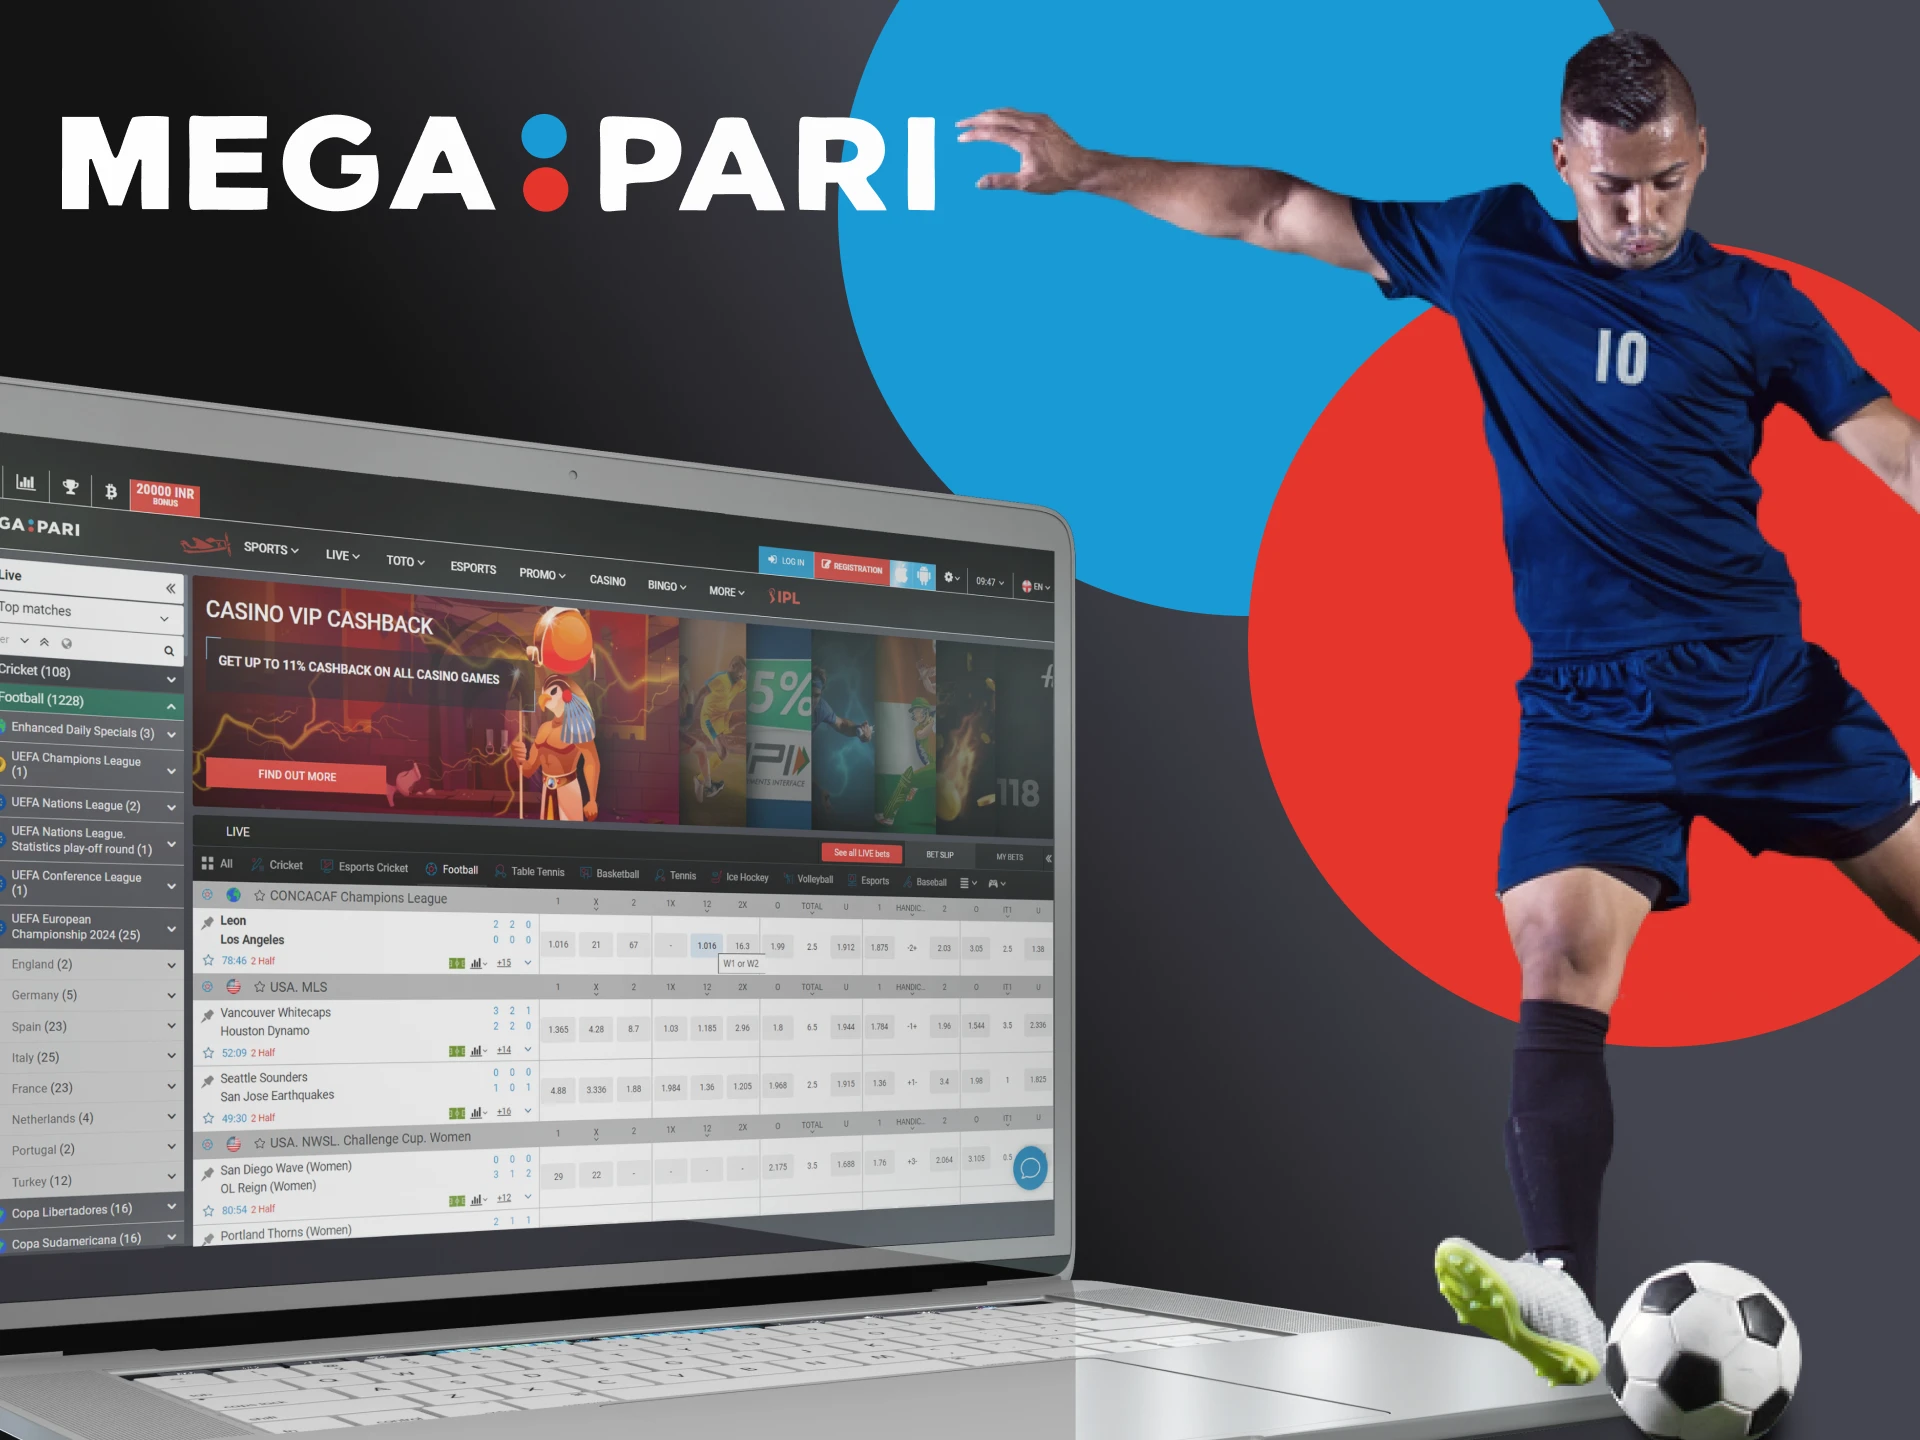 Go to the sports section of Megapari to bet on football.